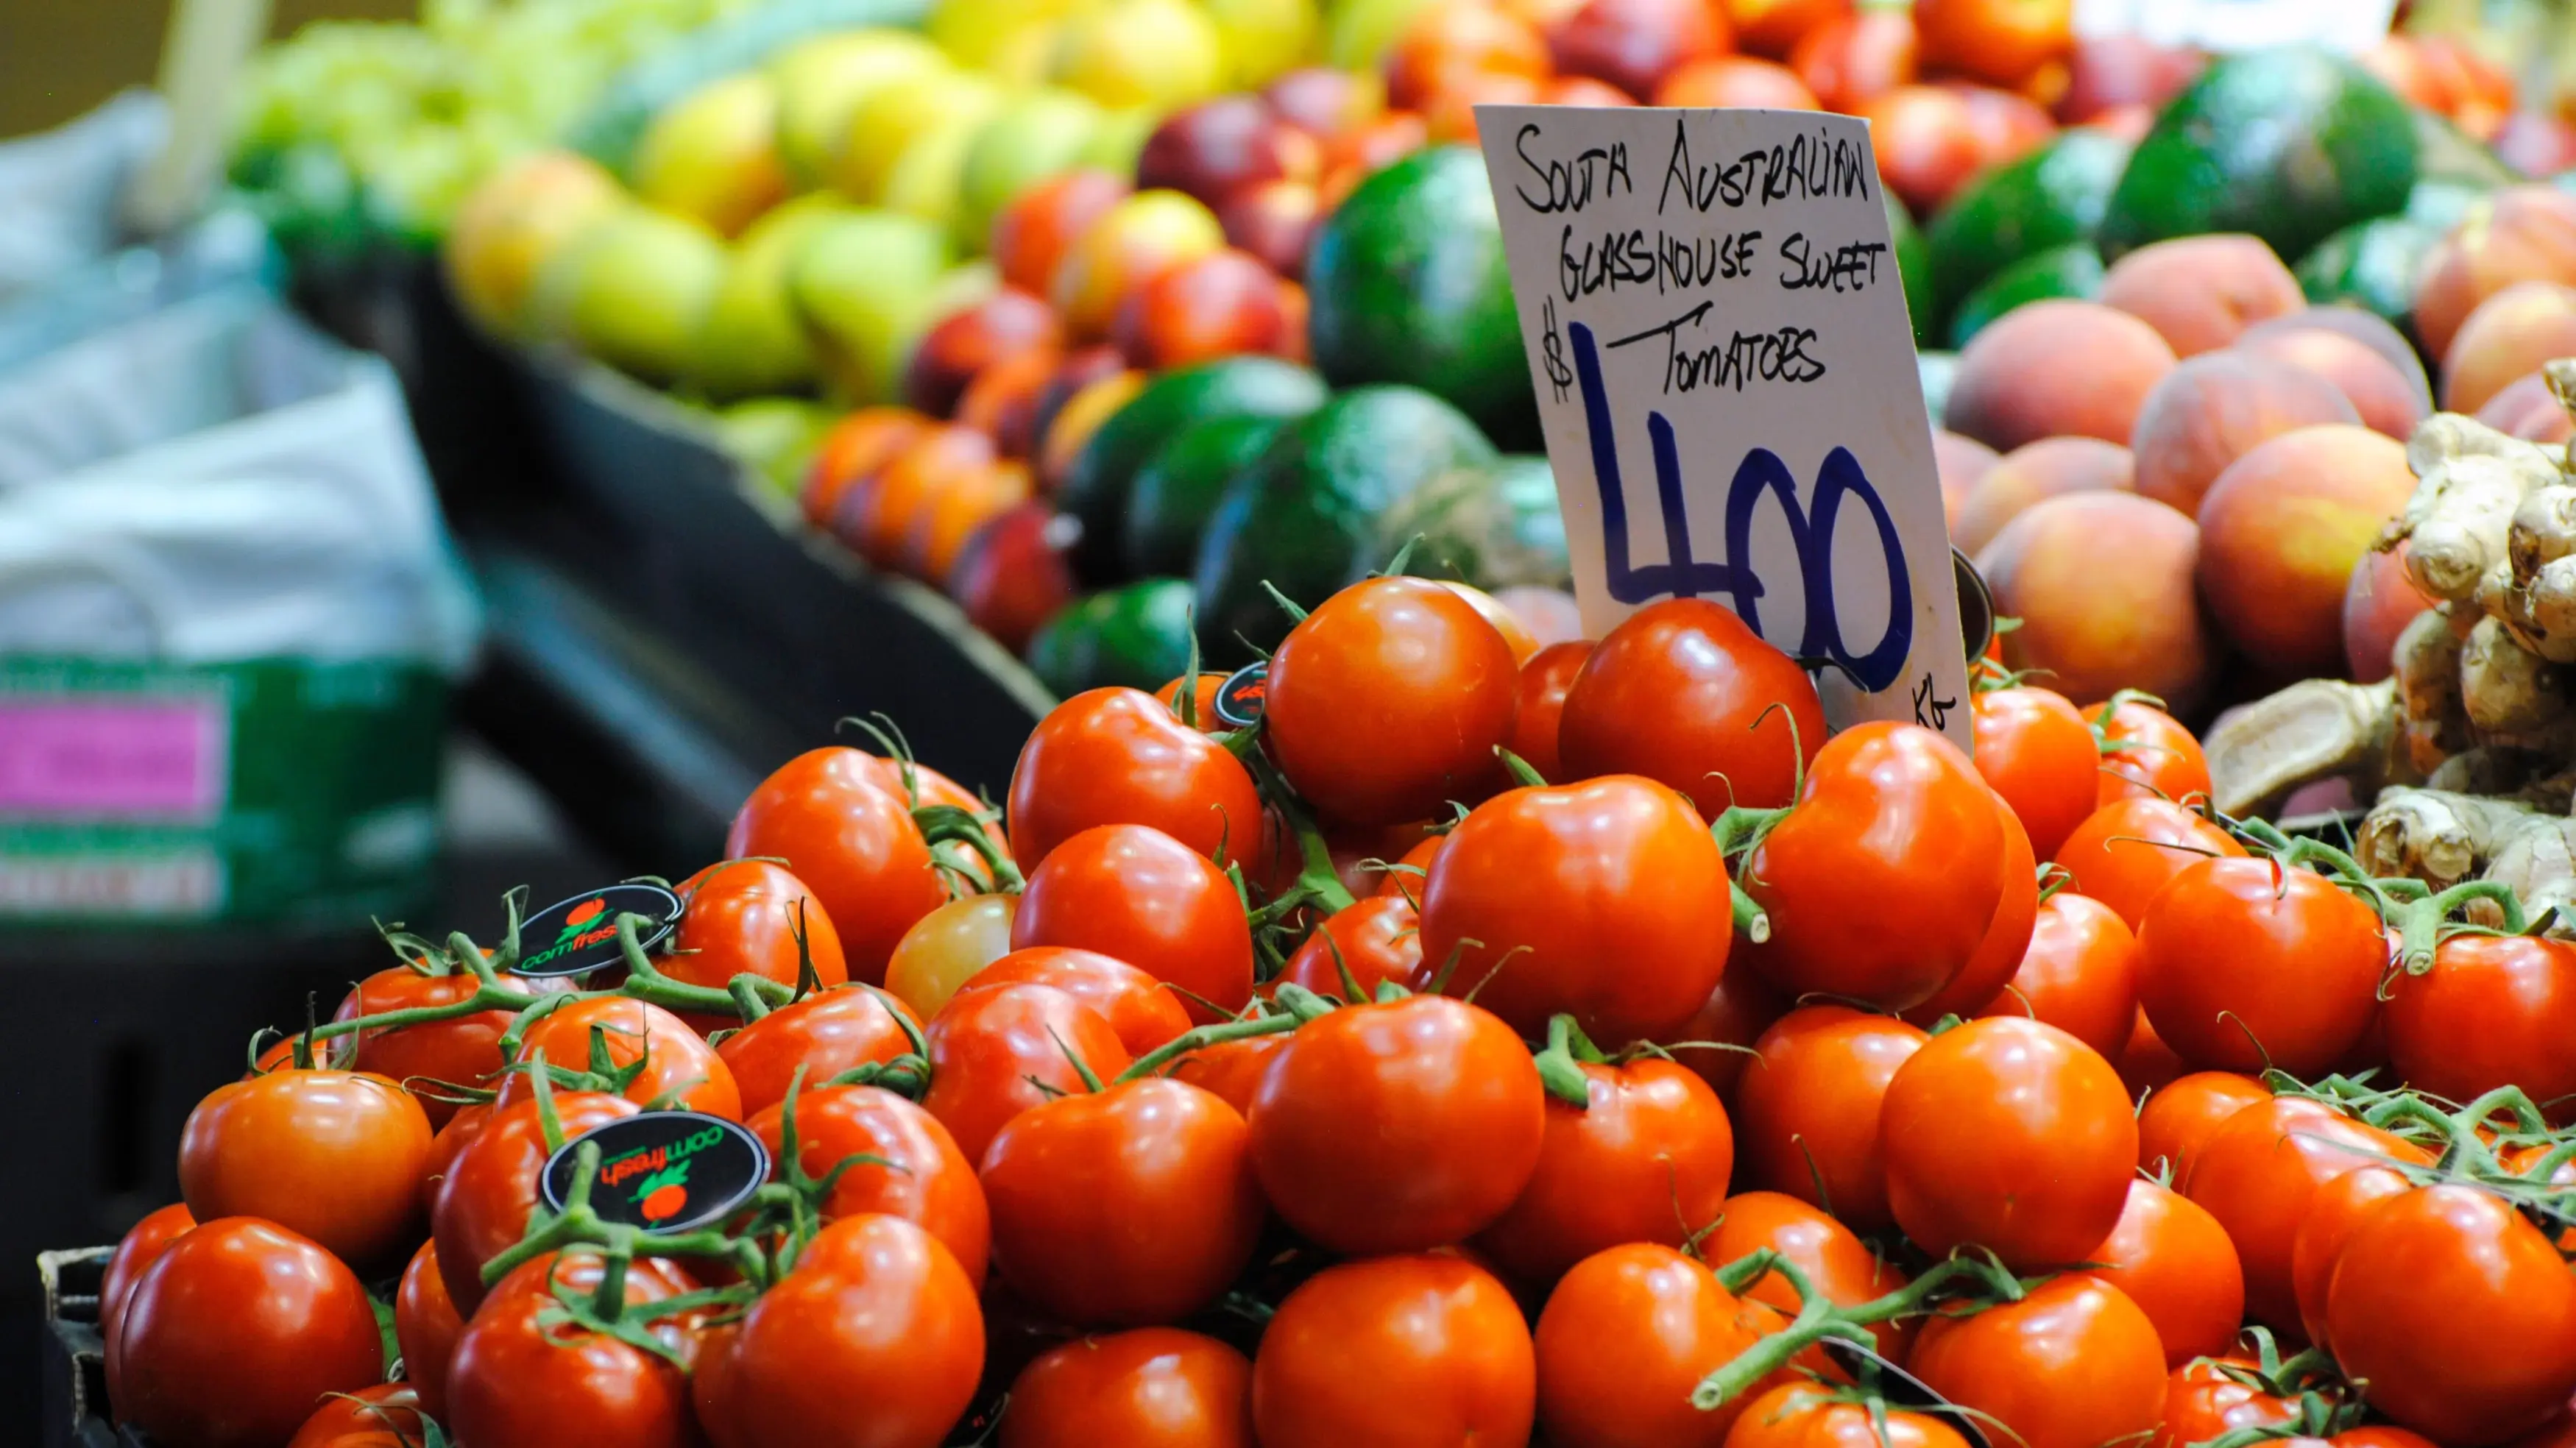 A market stall piled high with South Australian Glasshouse sweet tomatoes. Image credit: stock.adobe.com